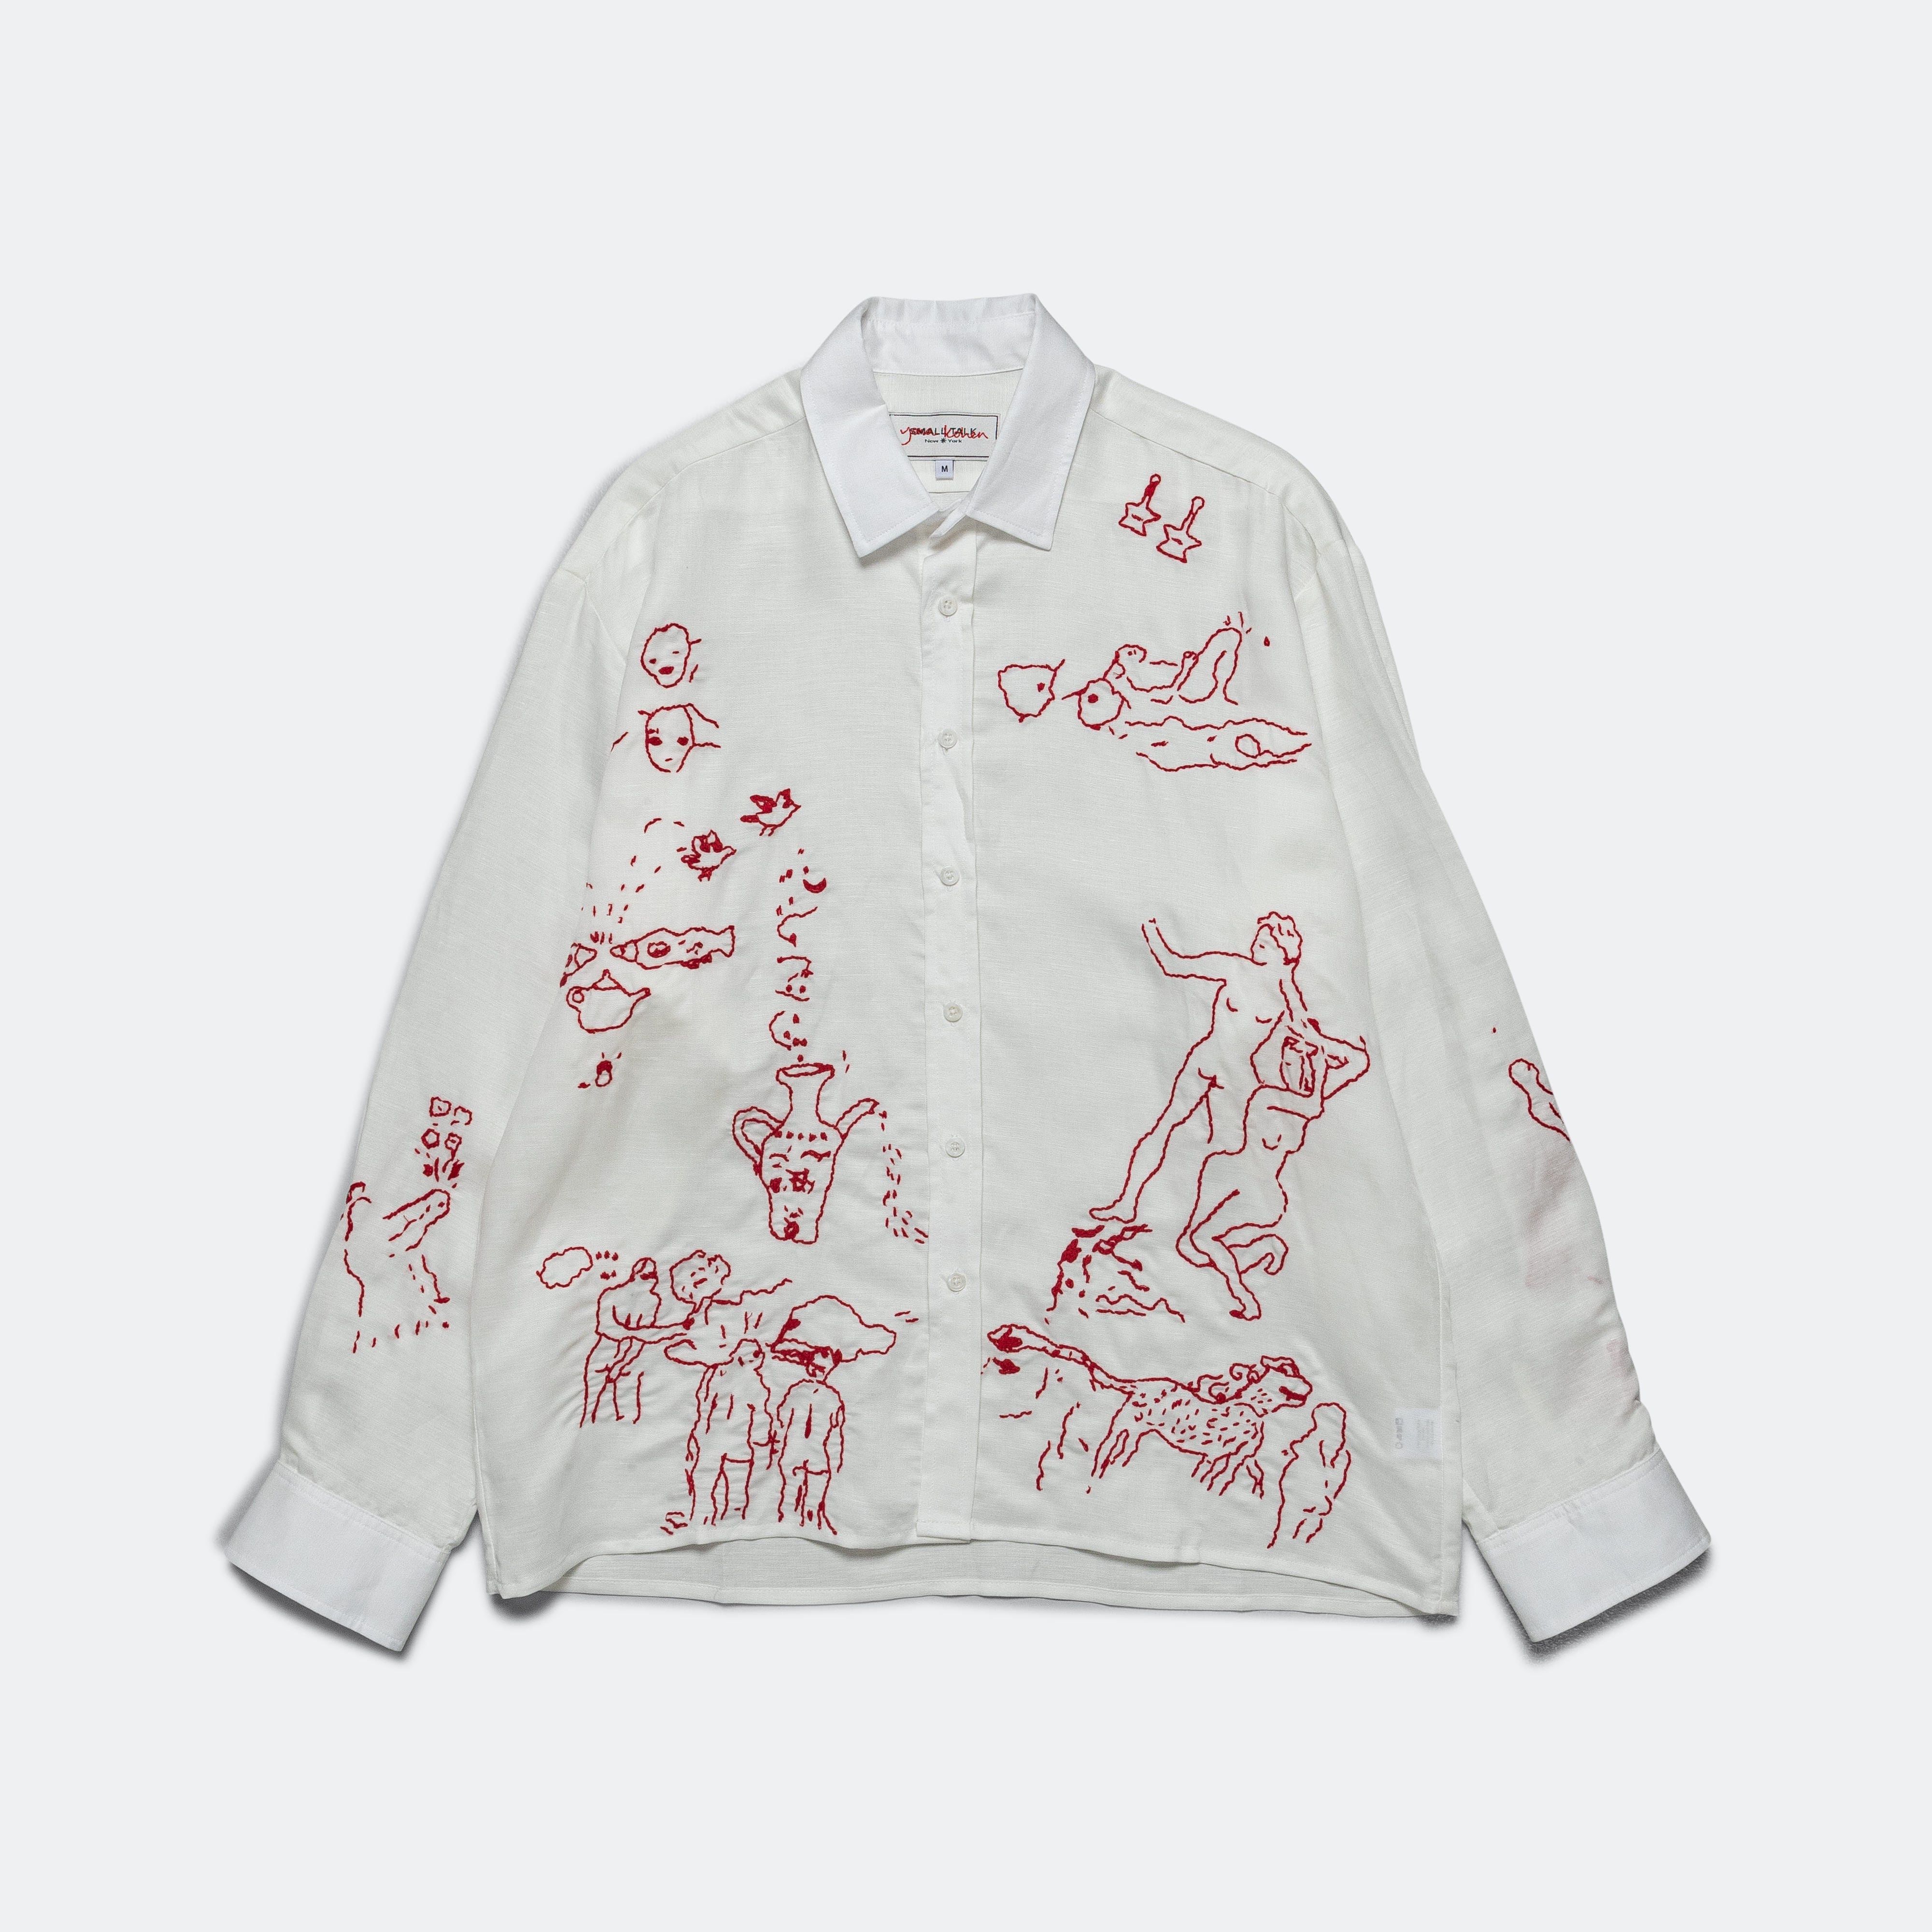 Small Talk Yona Kohen Embroidered Dress Shirt - White | UP THERE